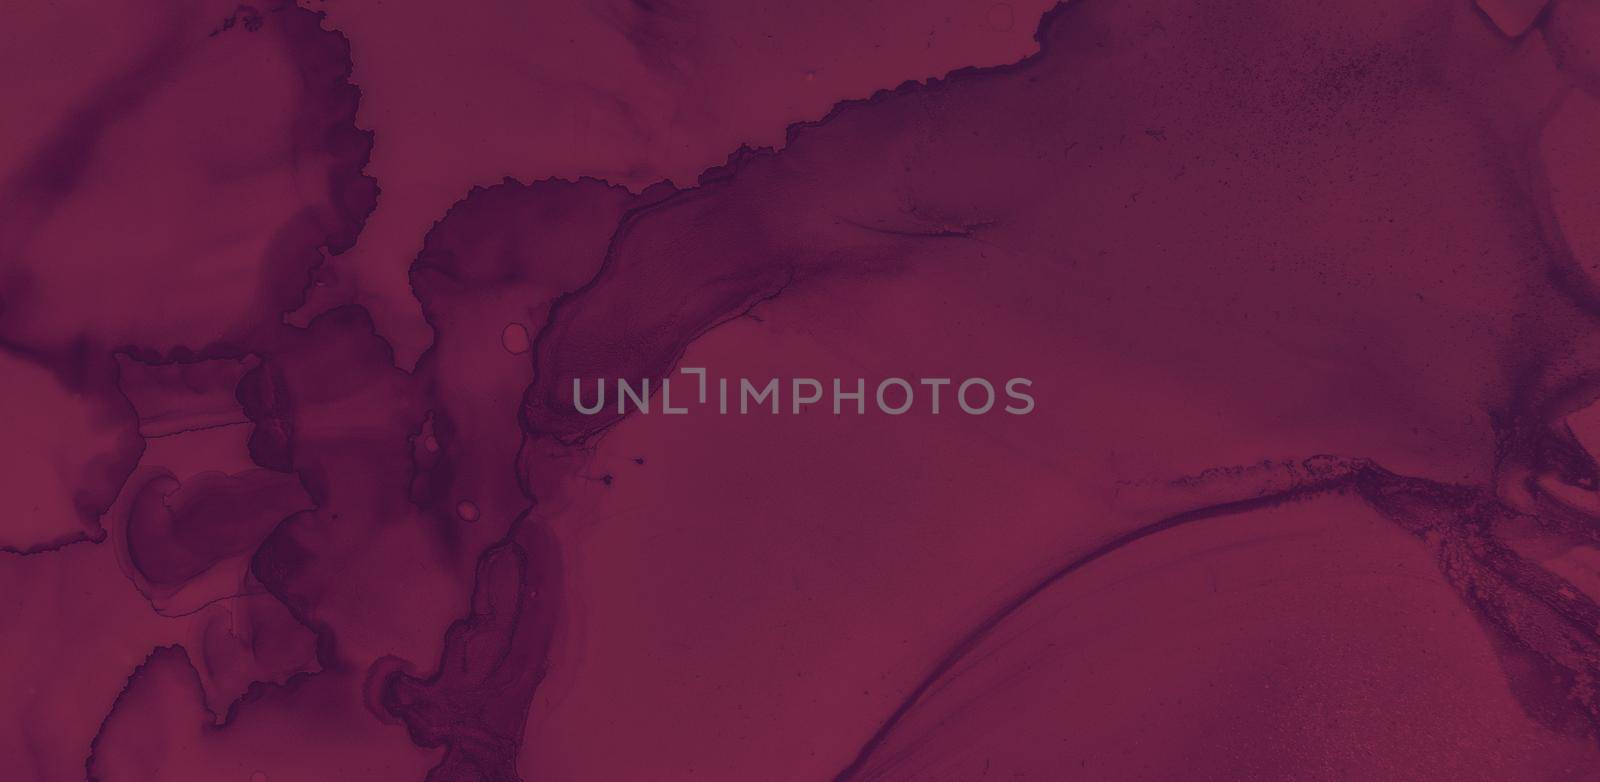 Red Wine Splash. Watercolour Winery Pattern. Abstract Alcohol Banner. Abstract Burgundy Banner. Color Wine Splash. Watercolour Maroon Texture. Dark Maroon Texture. Color Wine Splash.